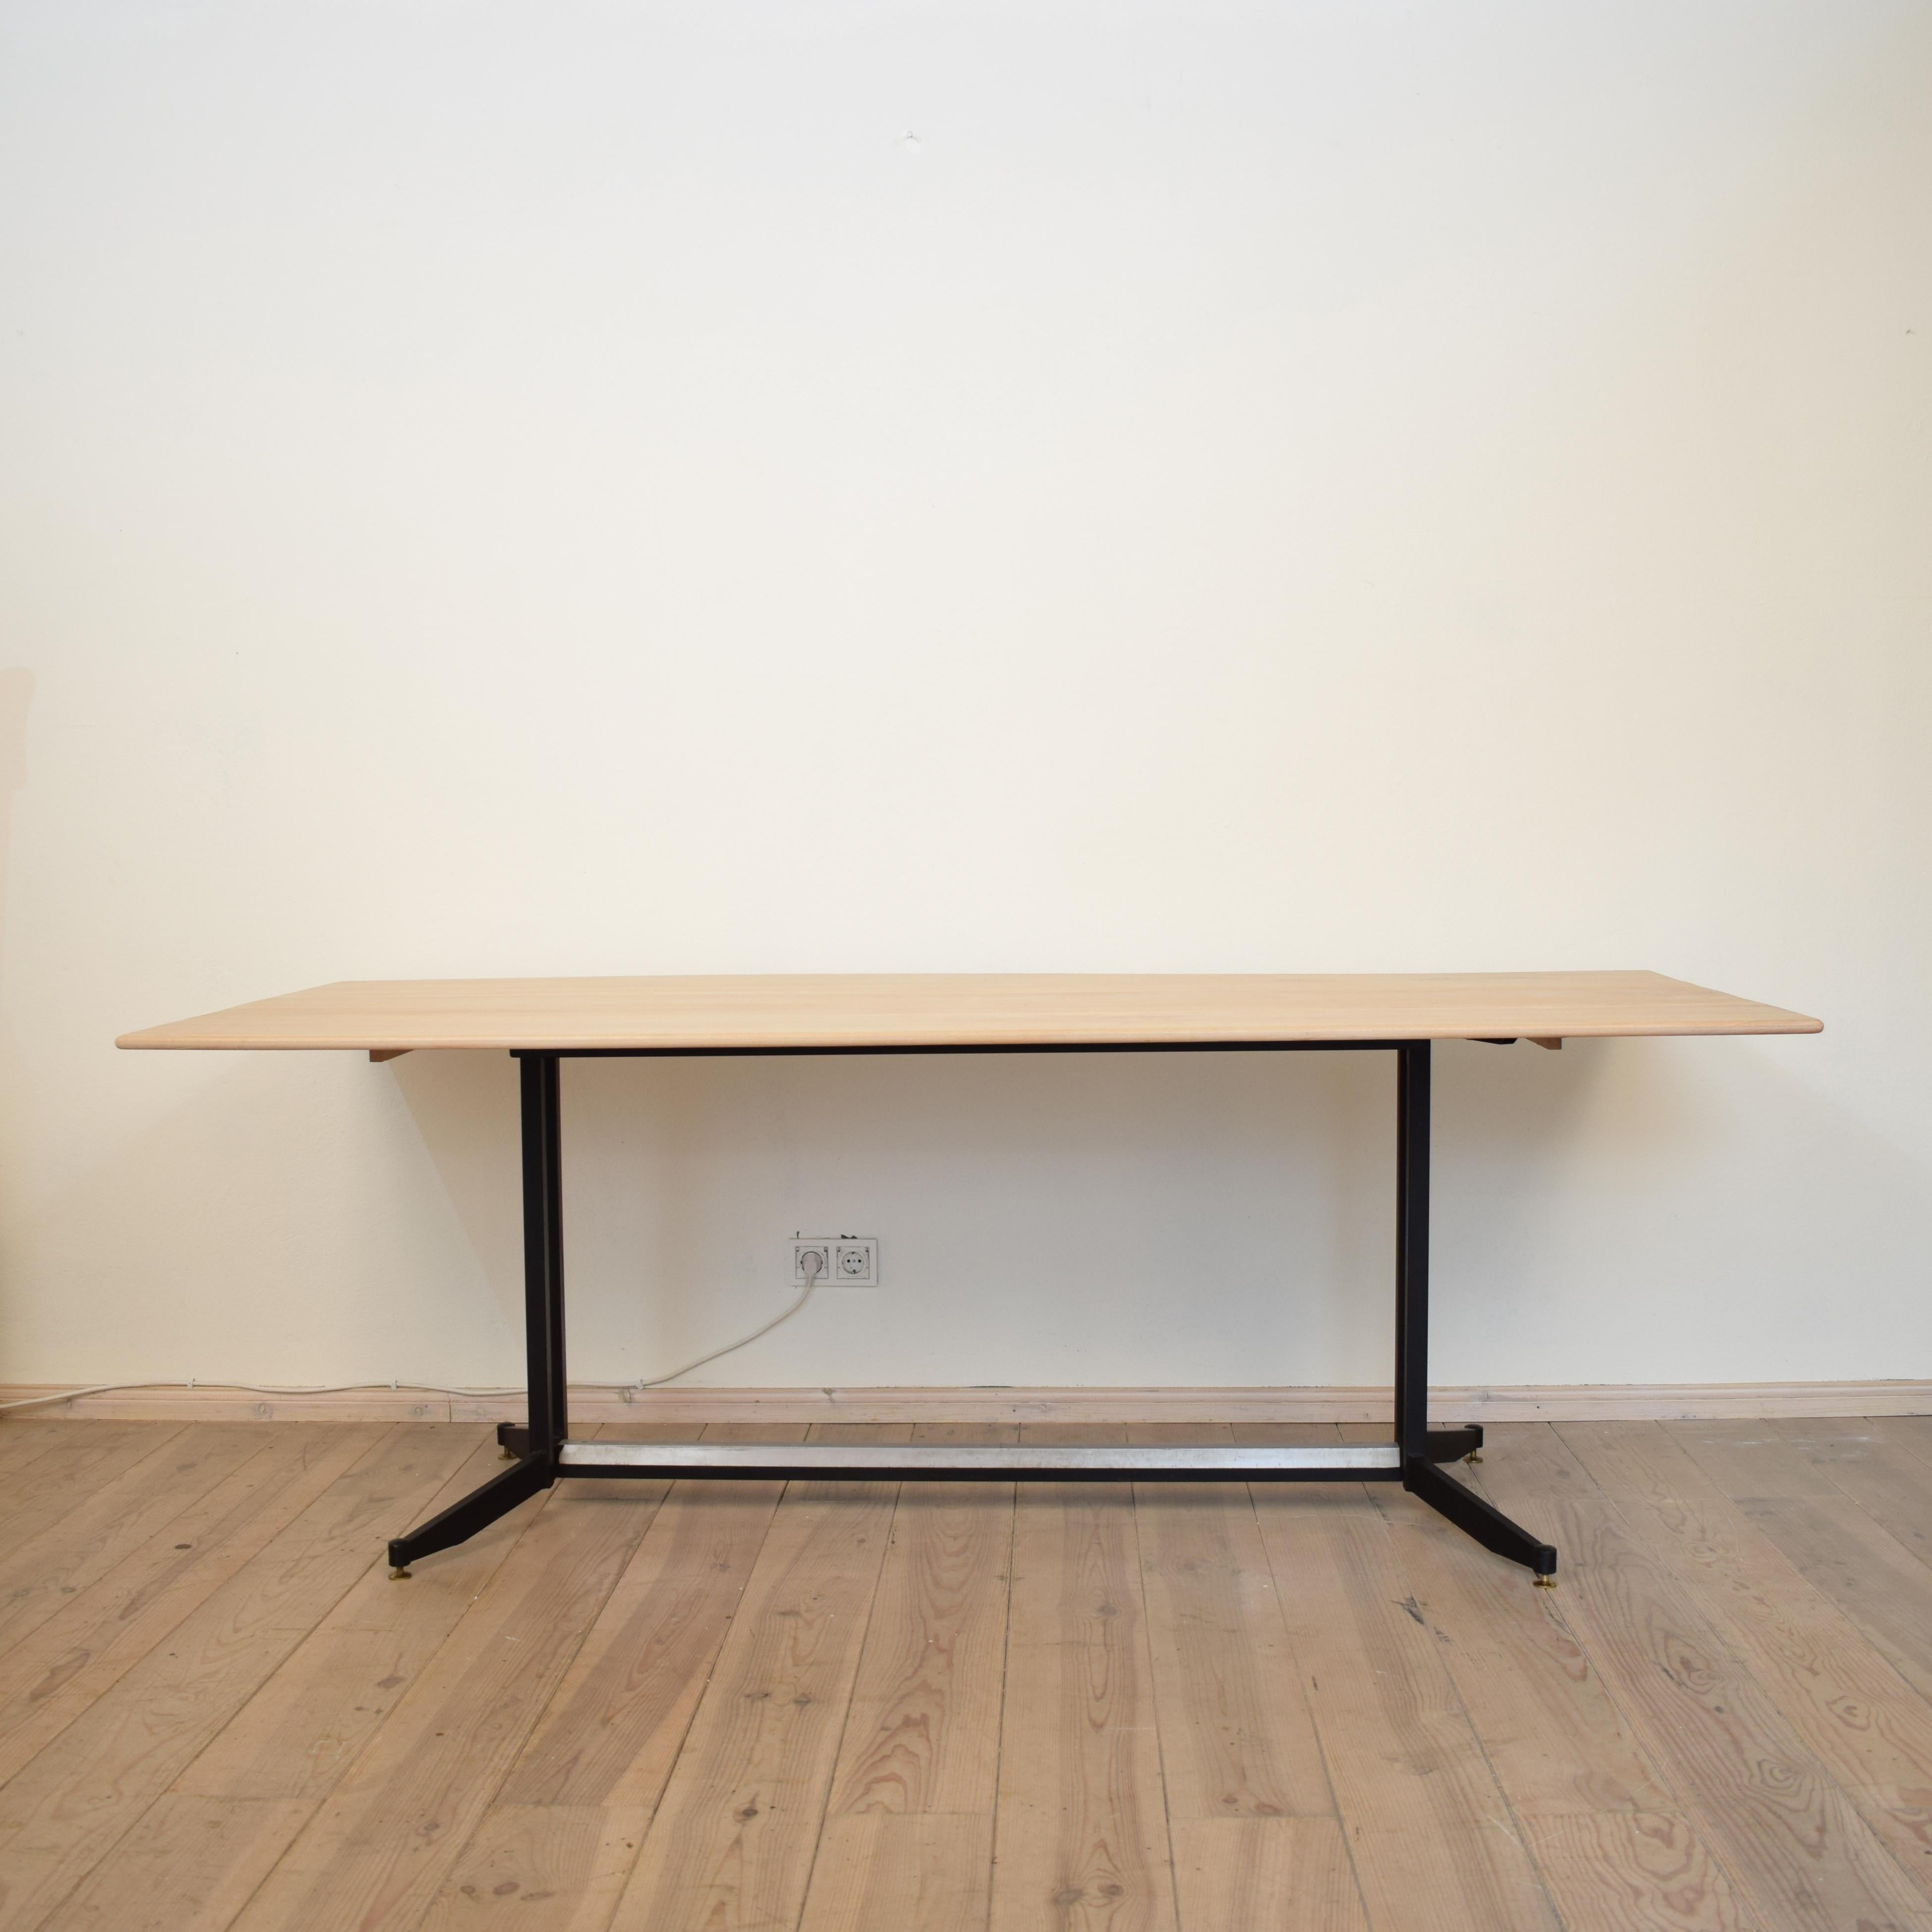 Midcentury Italian Black Lacquered Metal and Limed Elm Top Dining Table, 1950s In Good Condition For Sale In Berlin, DE